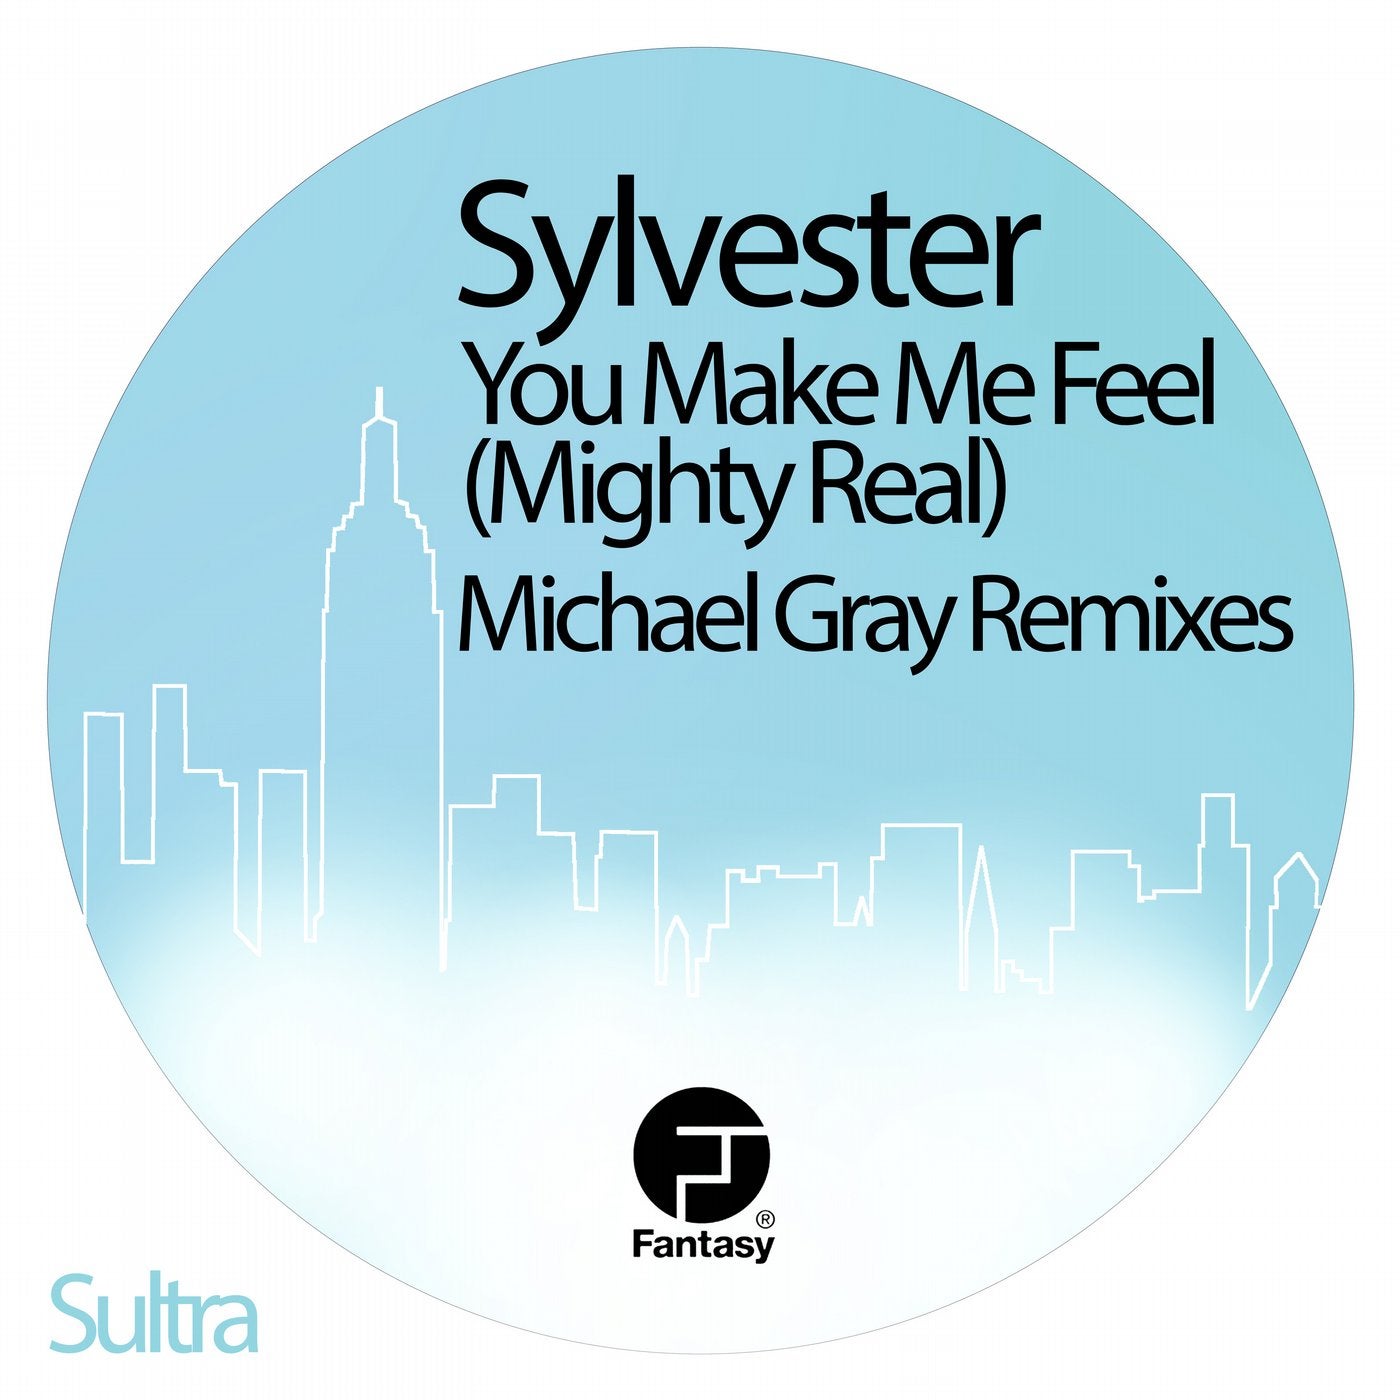 You Make Me Feel (Mighty Real) - Michael Gray Remixes